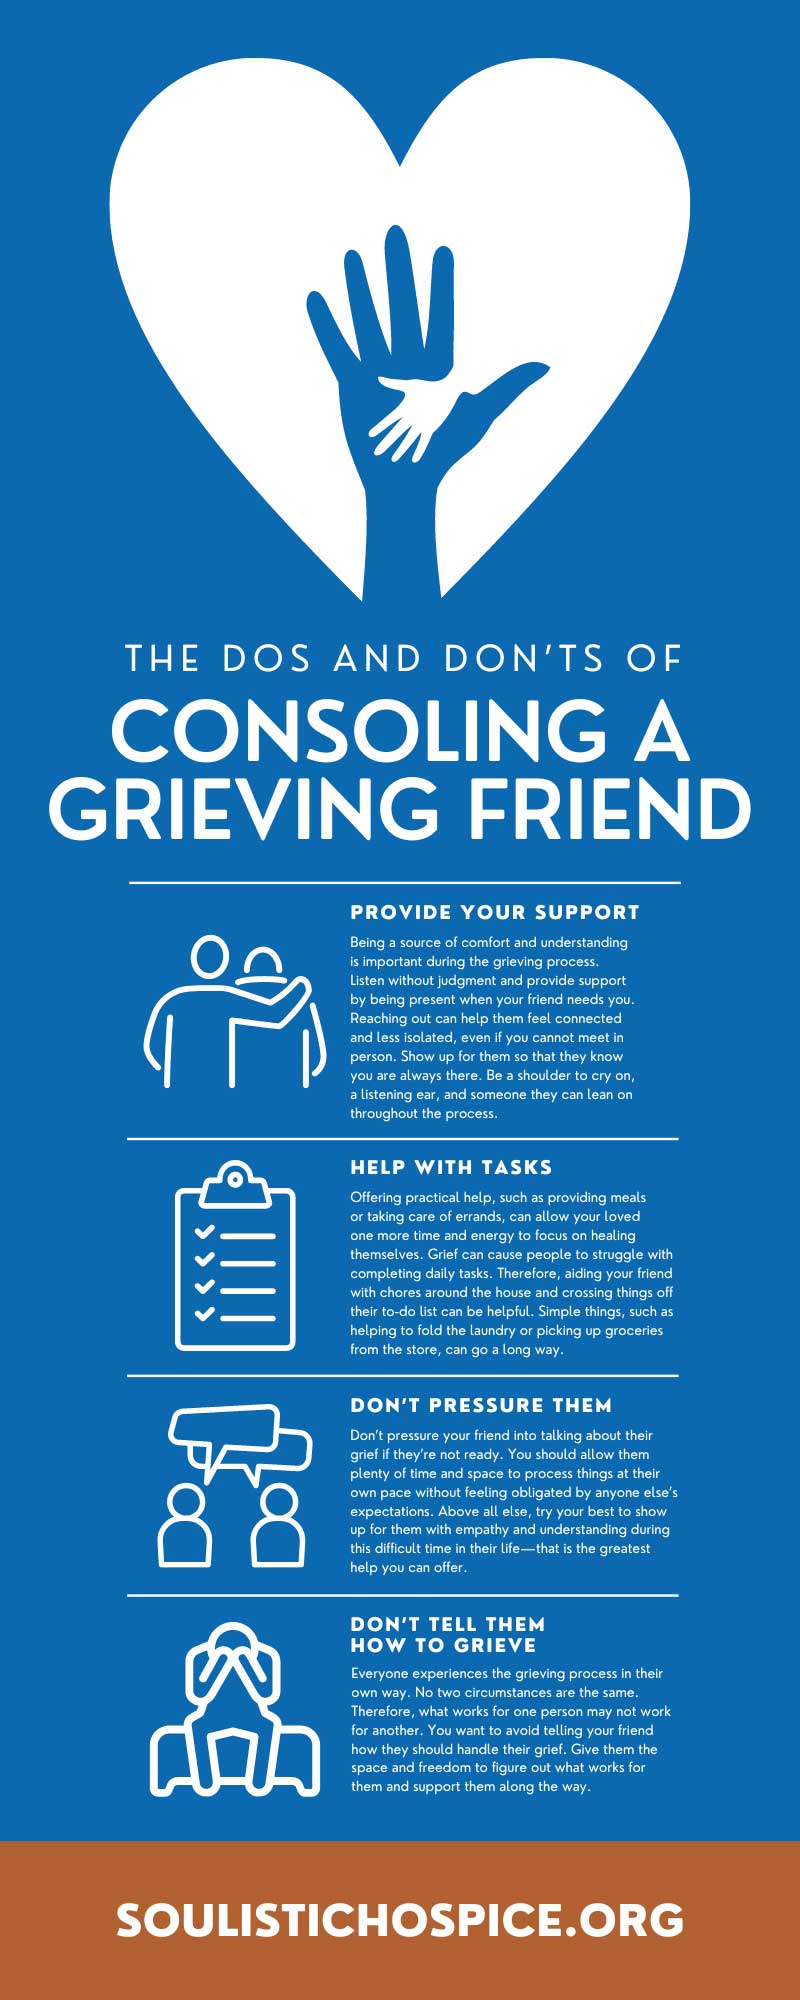 The Dos and Don’ts of Consoling a Grieving Friend